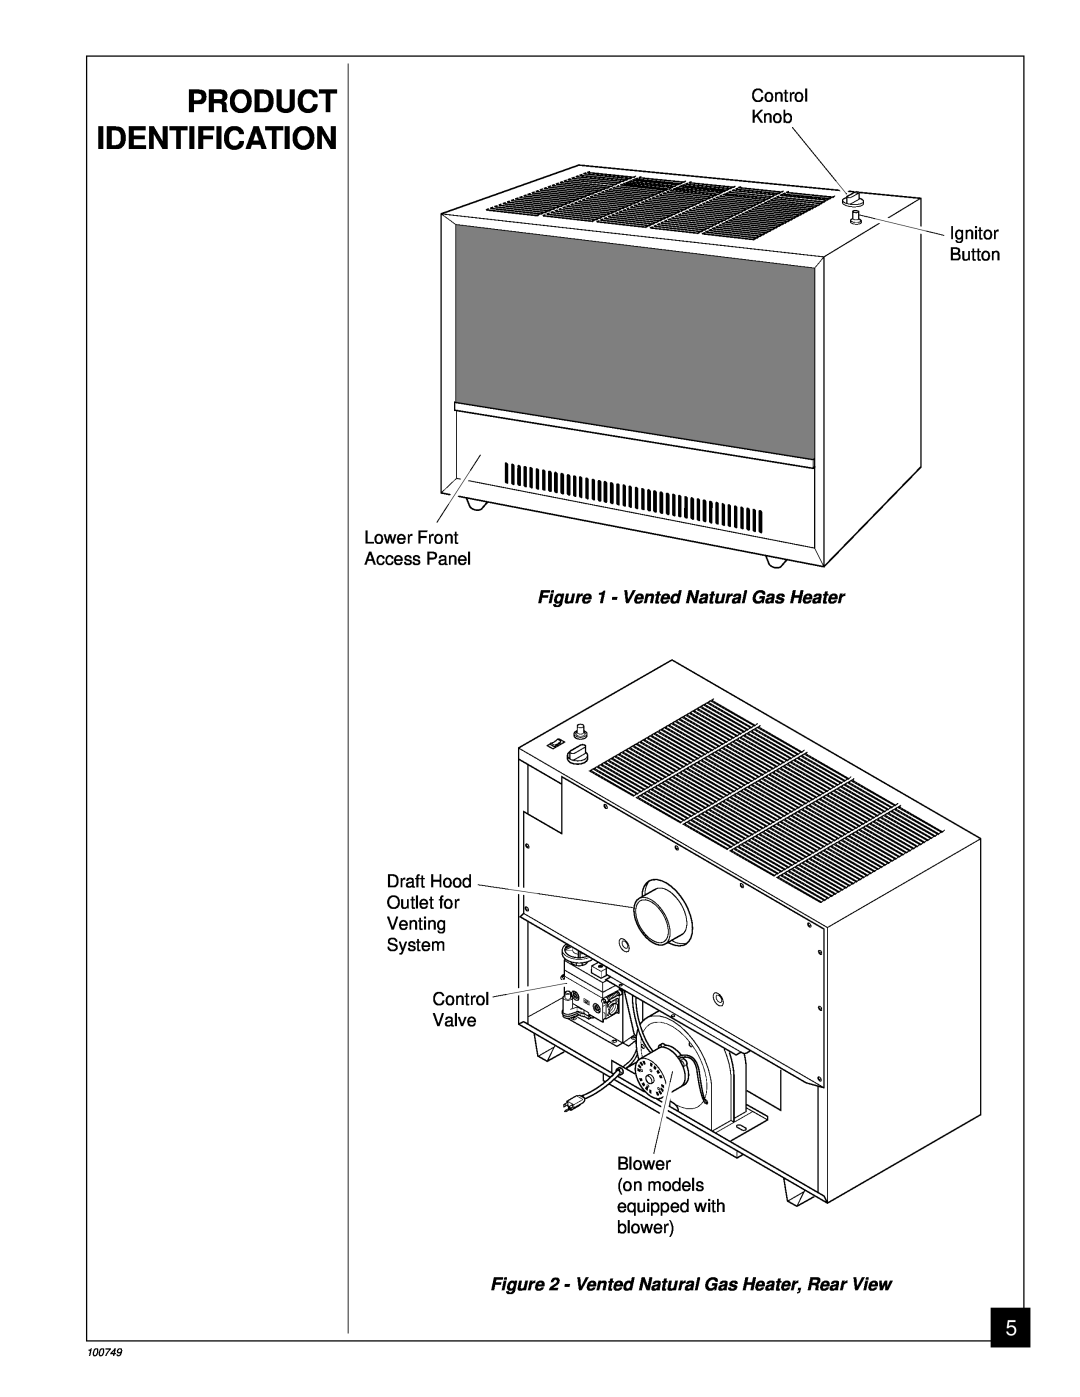 Desa GVC65NA, GVC50NA, GVC35NA installation manual Product Identification, Vented Natural Gas Heater, Rear View, 100749 